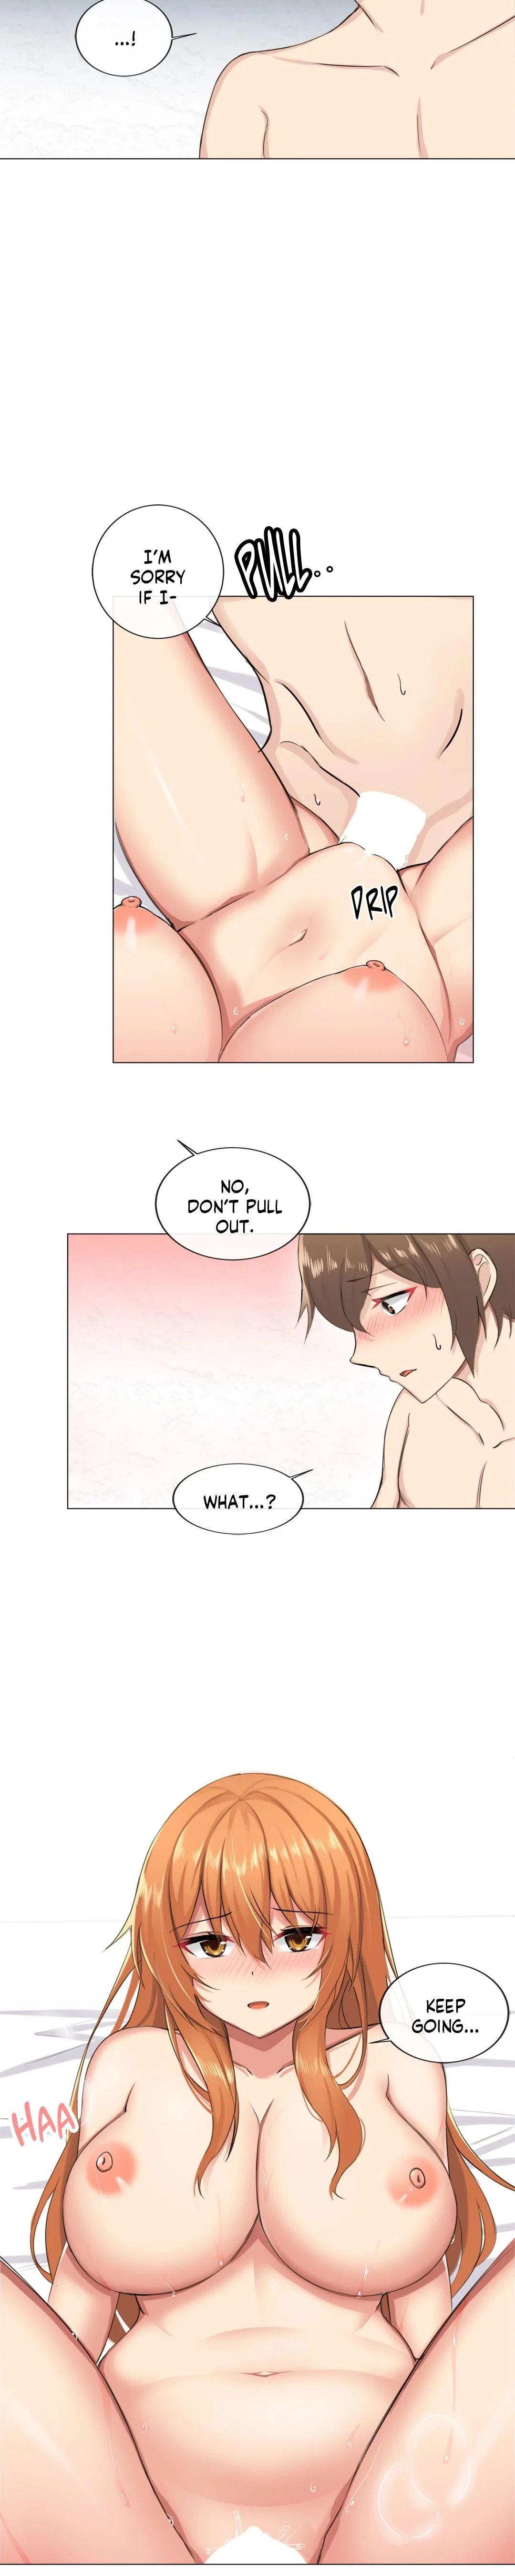 [Dumangoon, 130F] Sexcape Room: Pile Up Ch.9/9 [English] [Manhwa PDF] Completed 159